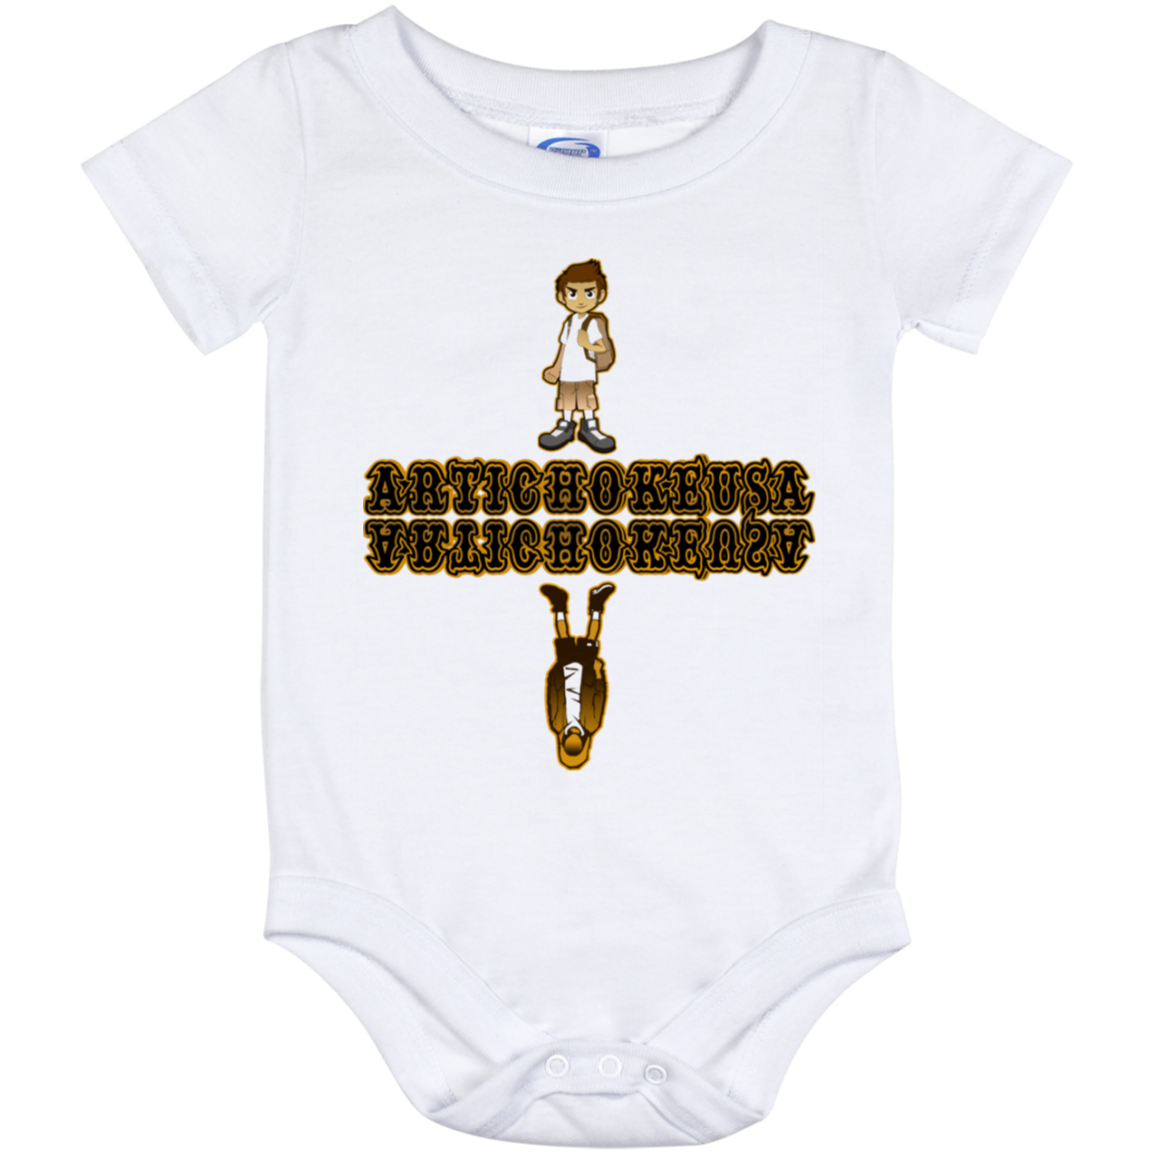 ArtichokeUSA Custom Design. Façade: (Noun) A false appearance that makes someone or something seem more pleasant or better than they really are. Baby Onesie 12 Month